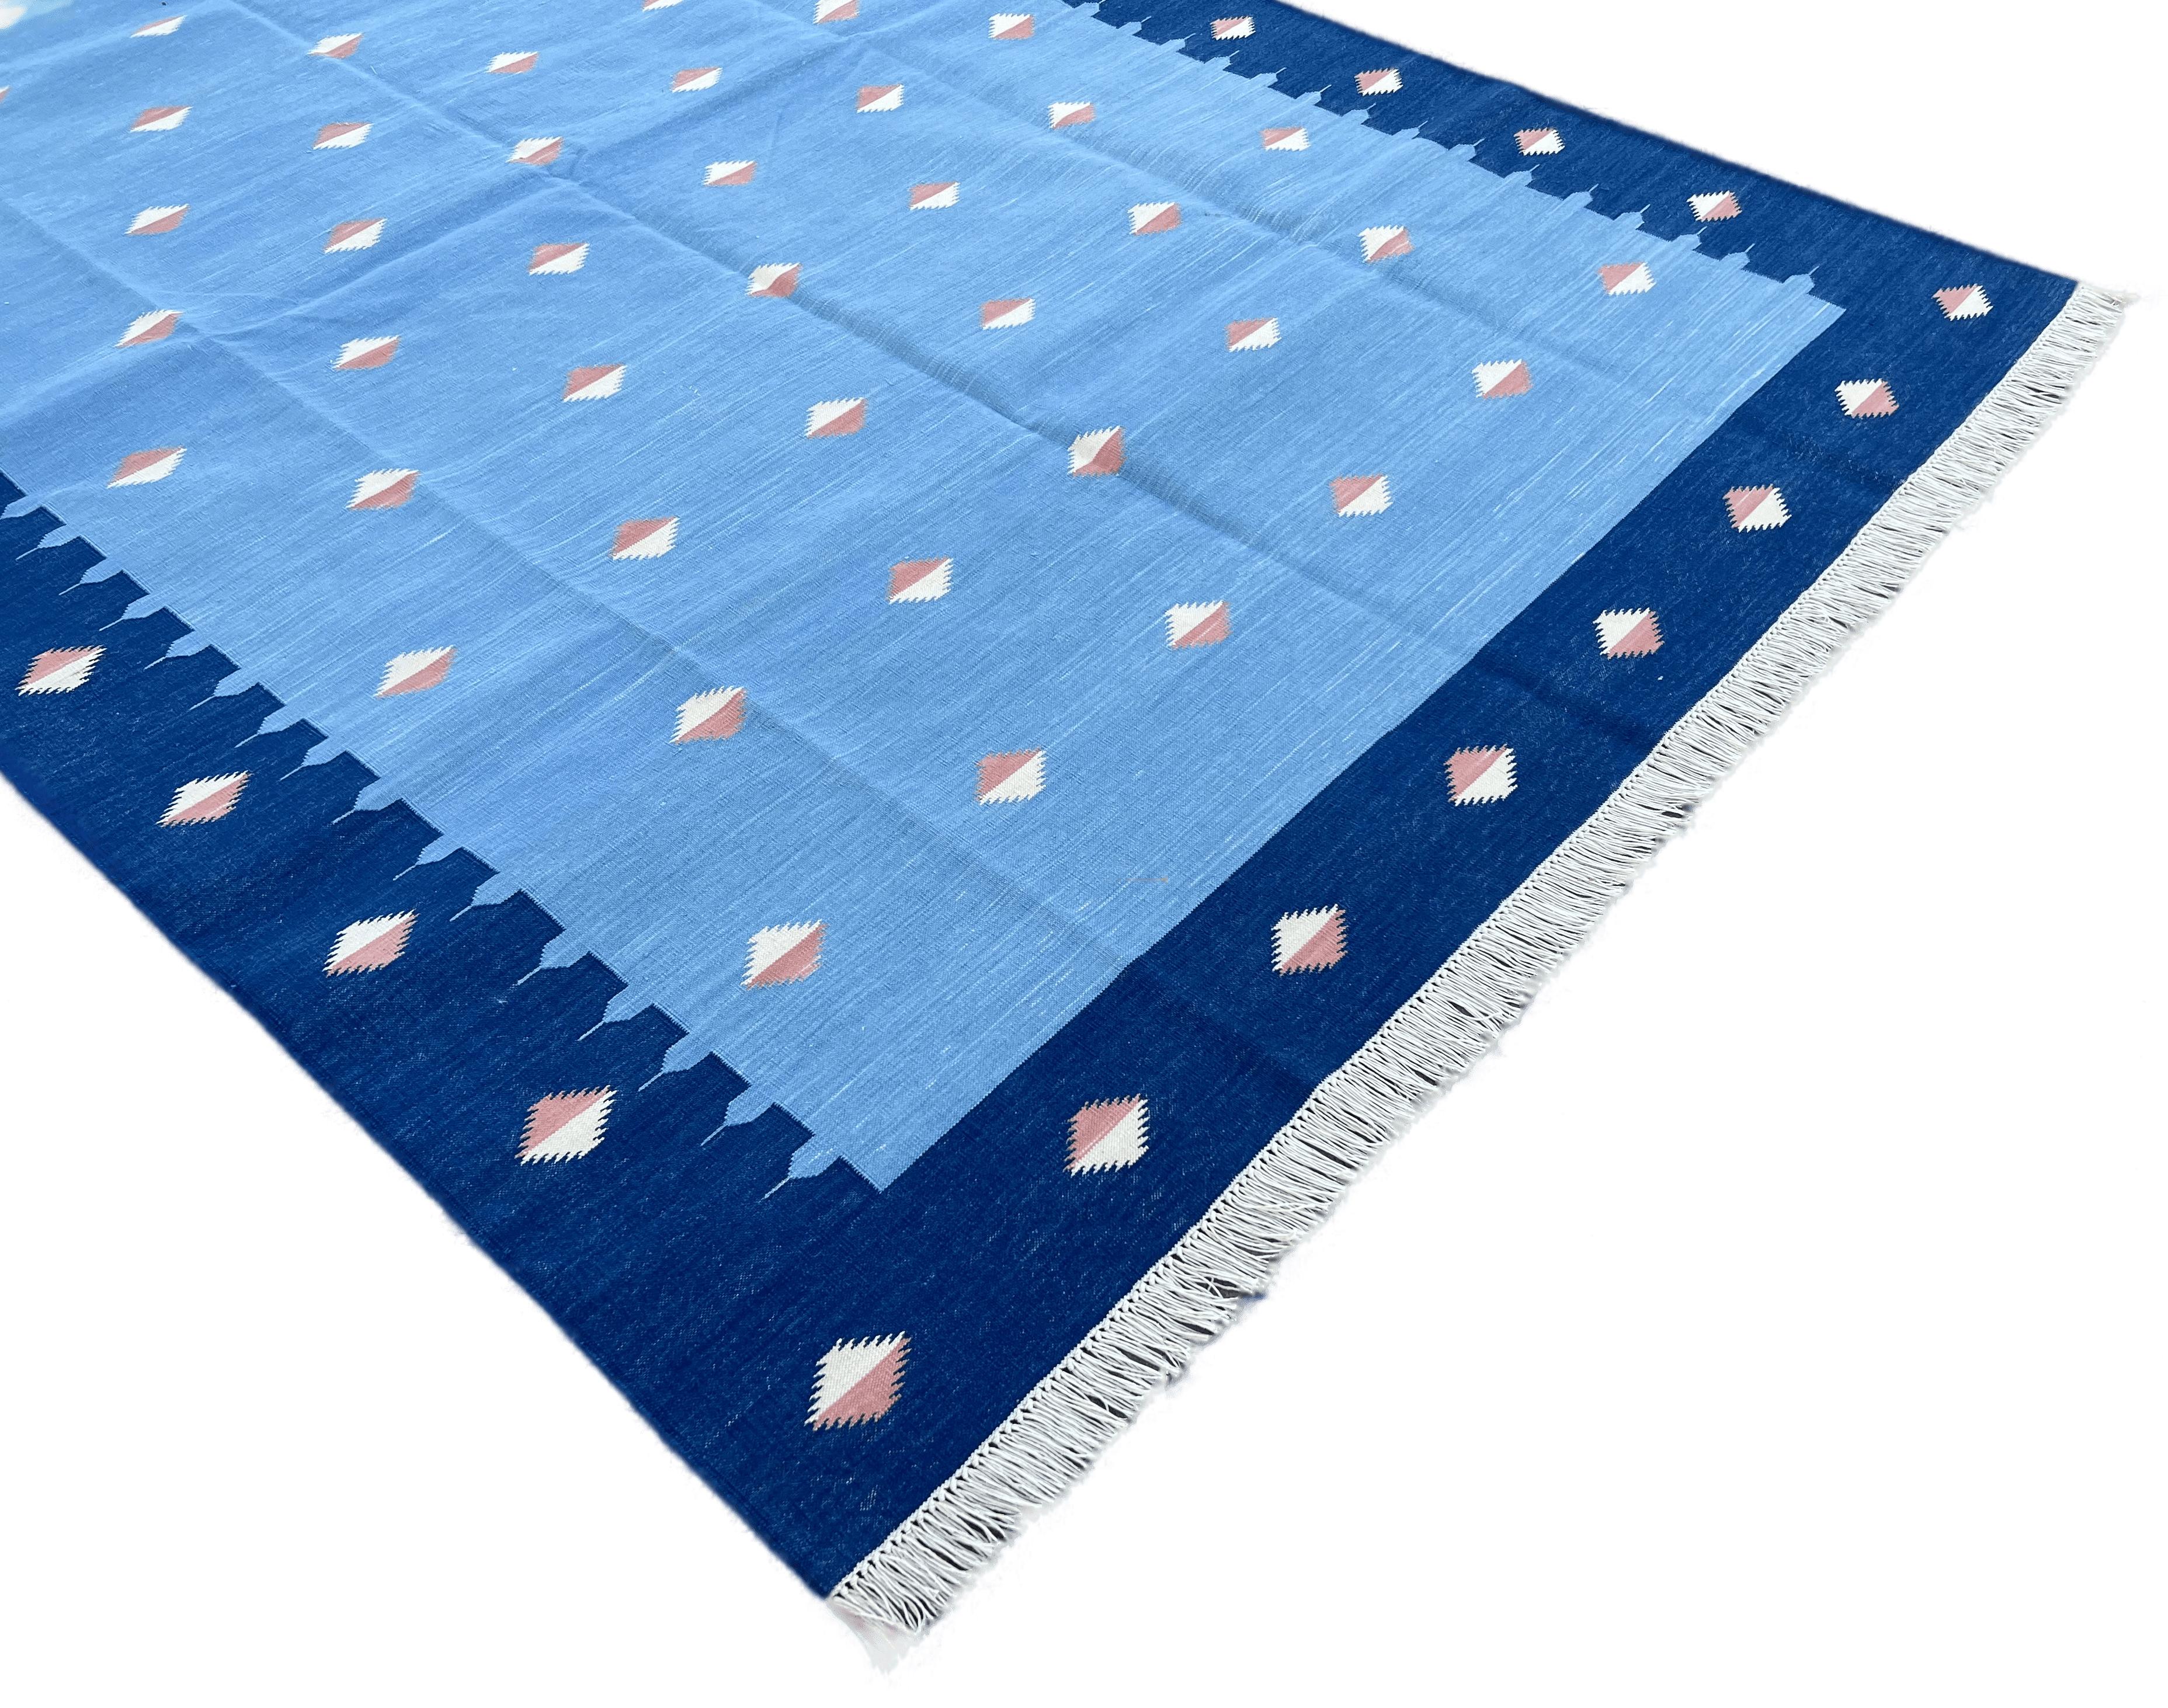 Handmade Cotton Area Flat Weave Rug, 6x9 Blue And Orange Diamond Indian Dhurrie In New Condition For Sale In Jaipur, IN